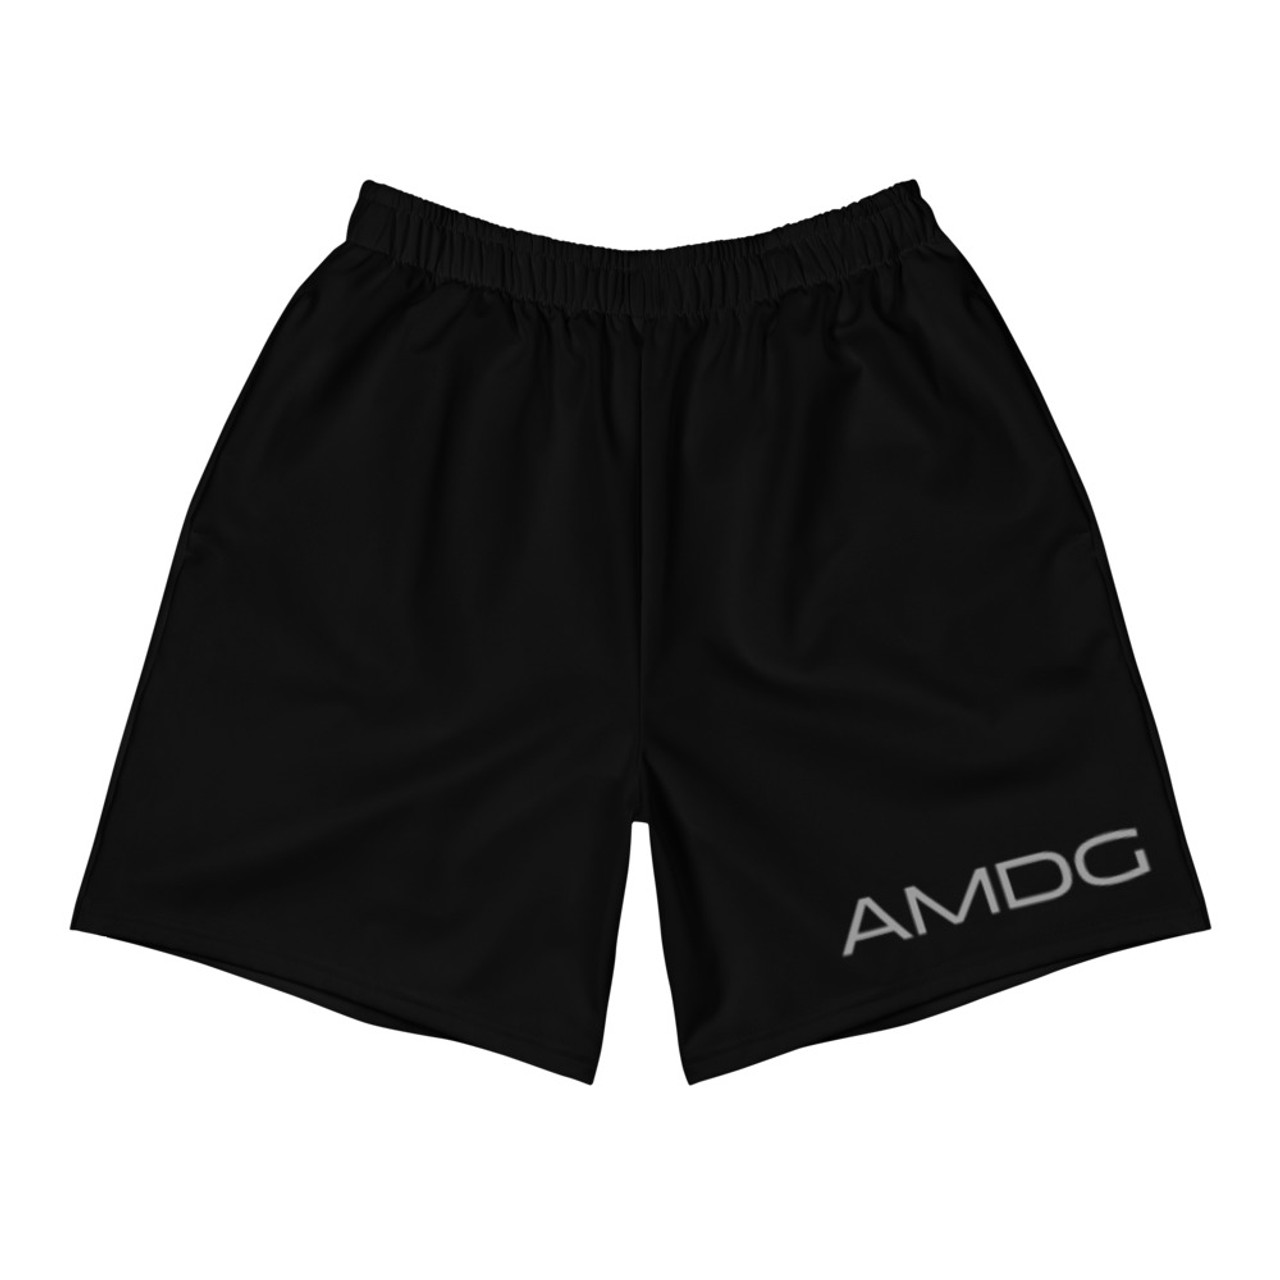 https://cdn11.bigcommerce.com/s-7k78xidlmv/images/stencil/1280x1280/products/287/867/all-over-print-mens-athletic-long-shorts-white-front-610ab25649e8a__39115.1628090971.jpg?c=1